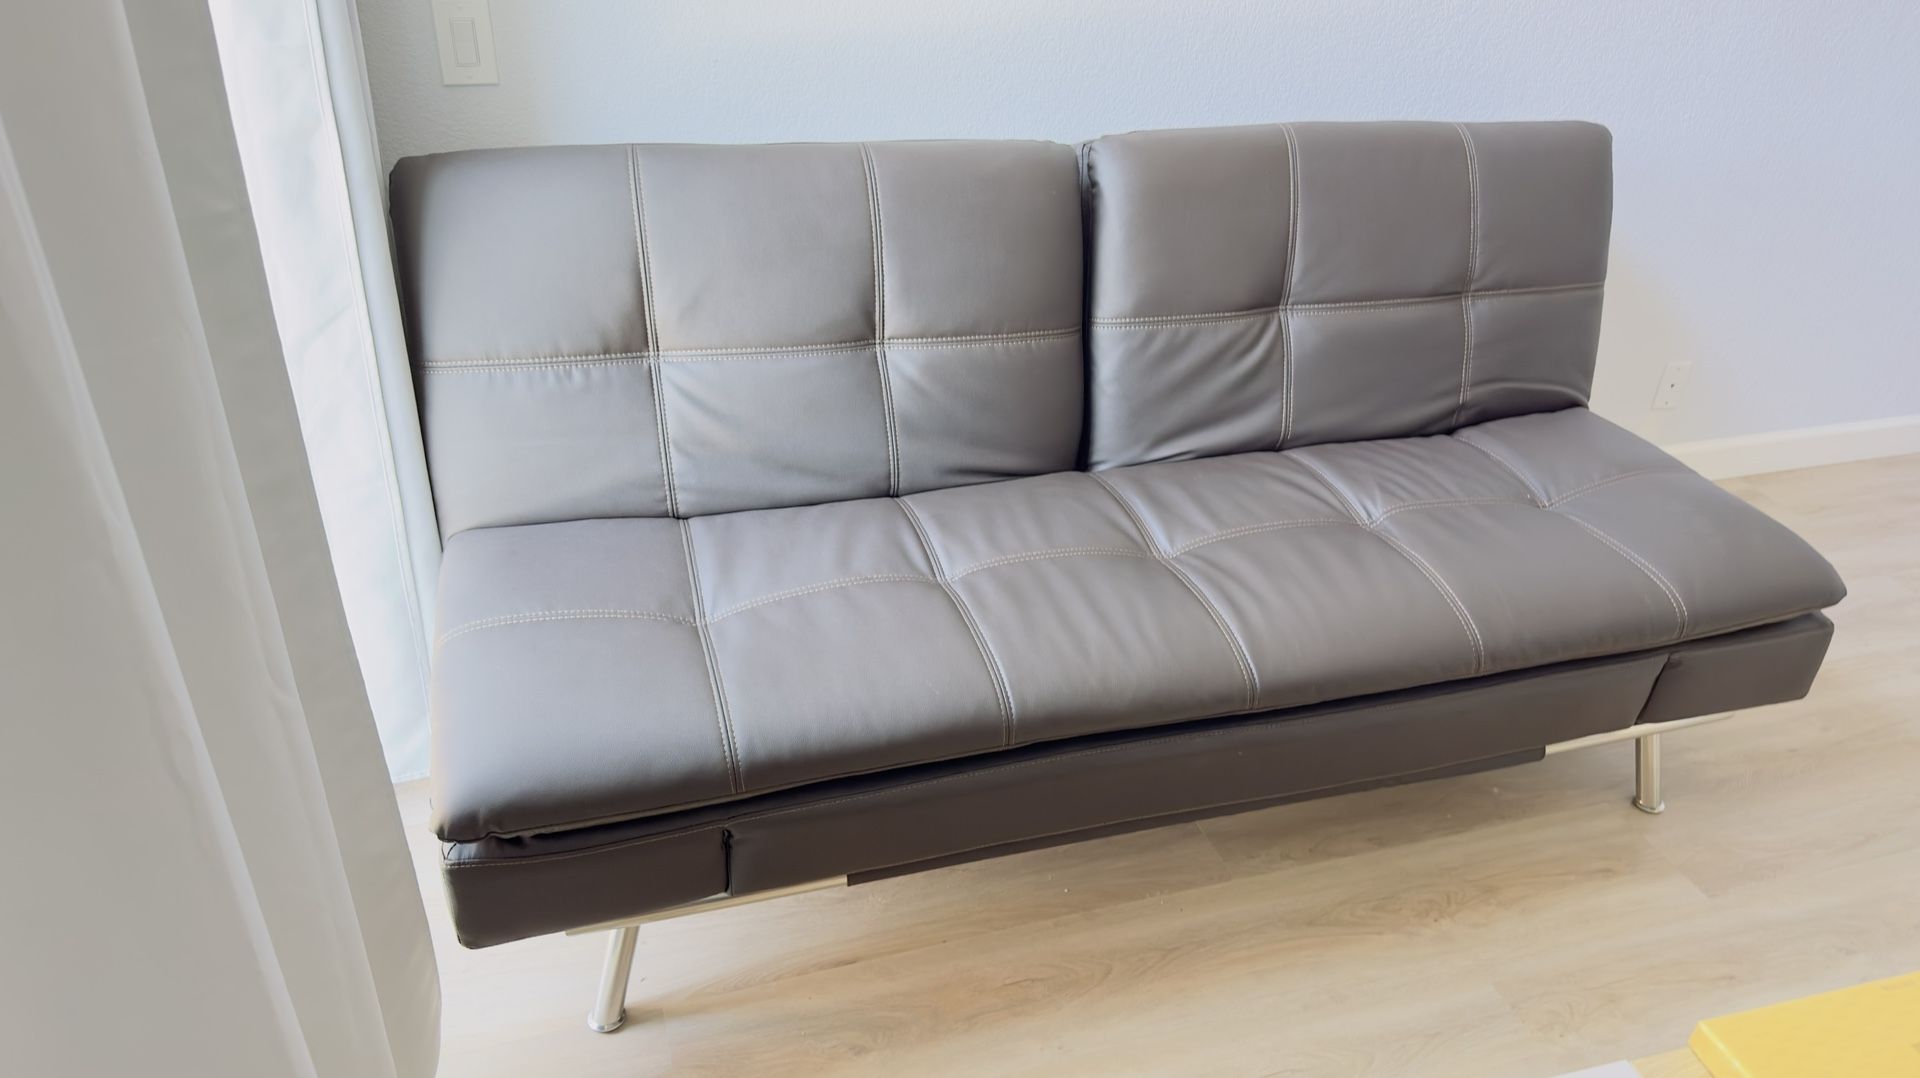 Ravenna Relax-A-Lounger Euro Lounger. Costco Sofa Bed. Like New.